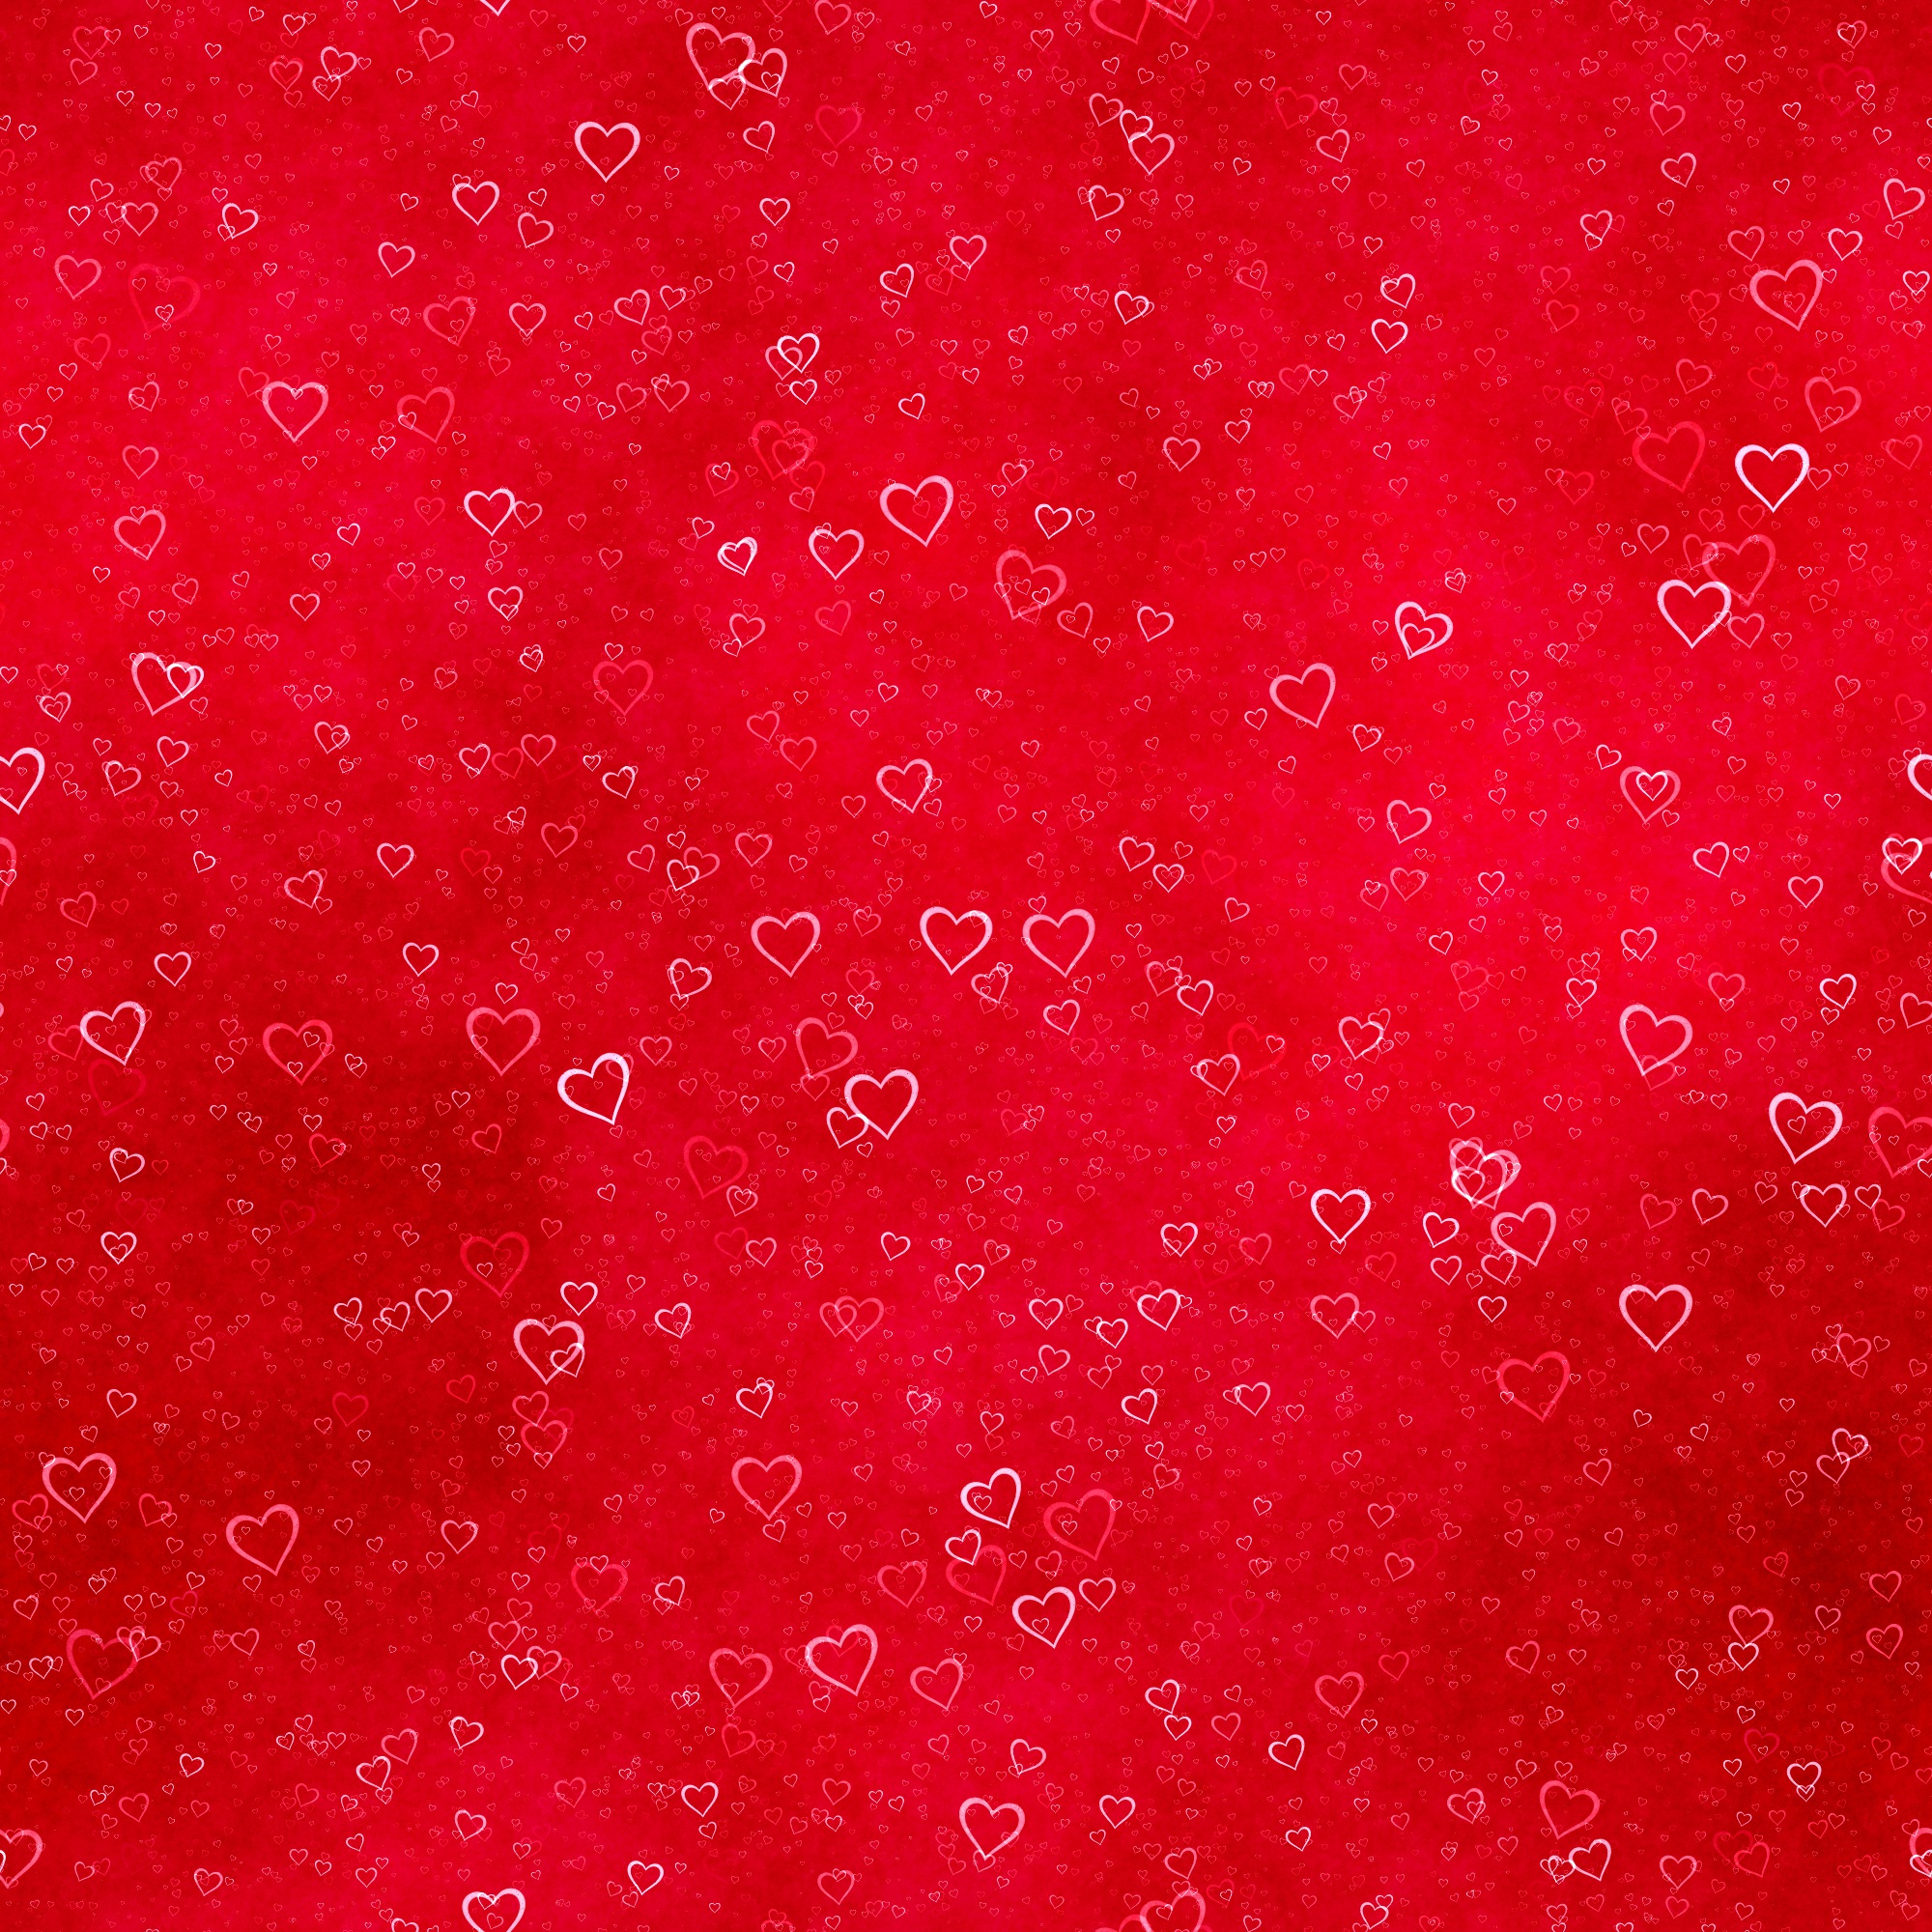 hearts, love, red, texture wallpaper for mobile